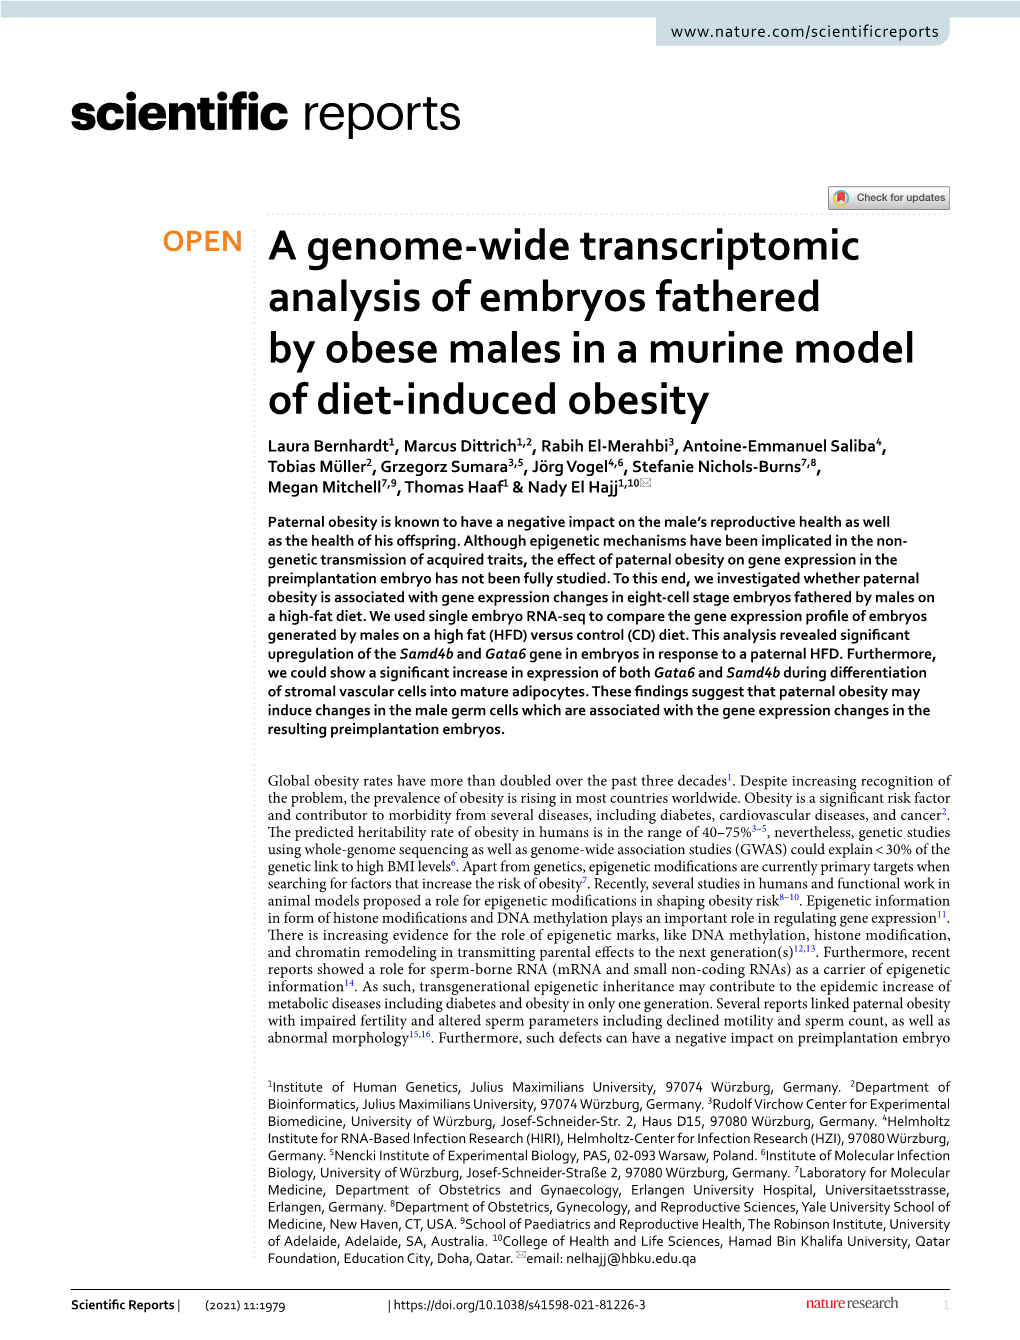 A Genome-Wide Transcriptomic Analysis of Embryos Fathered By